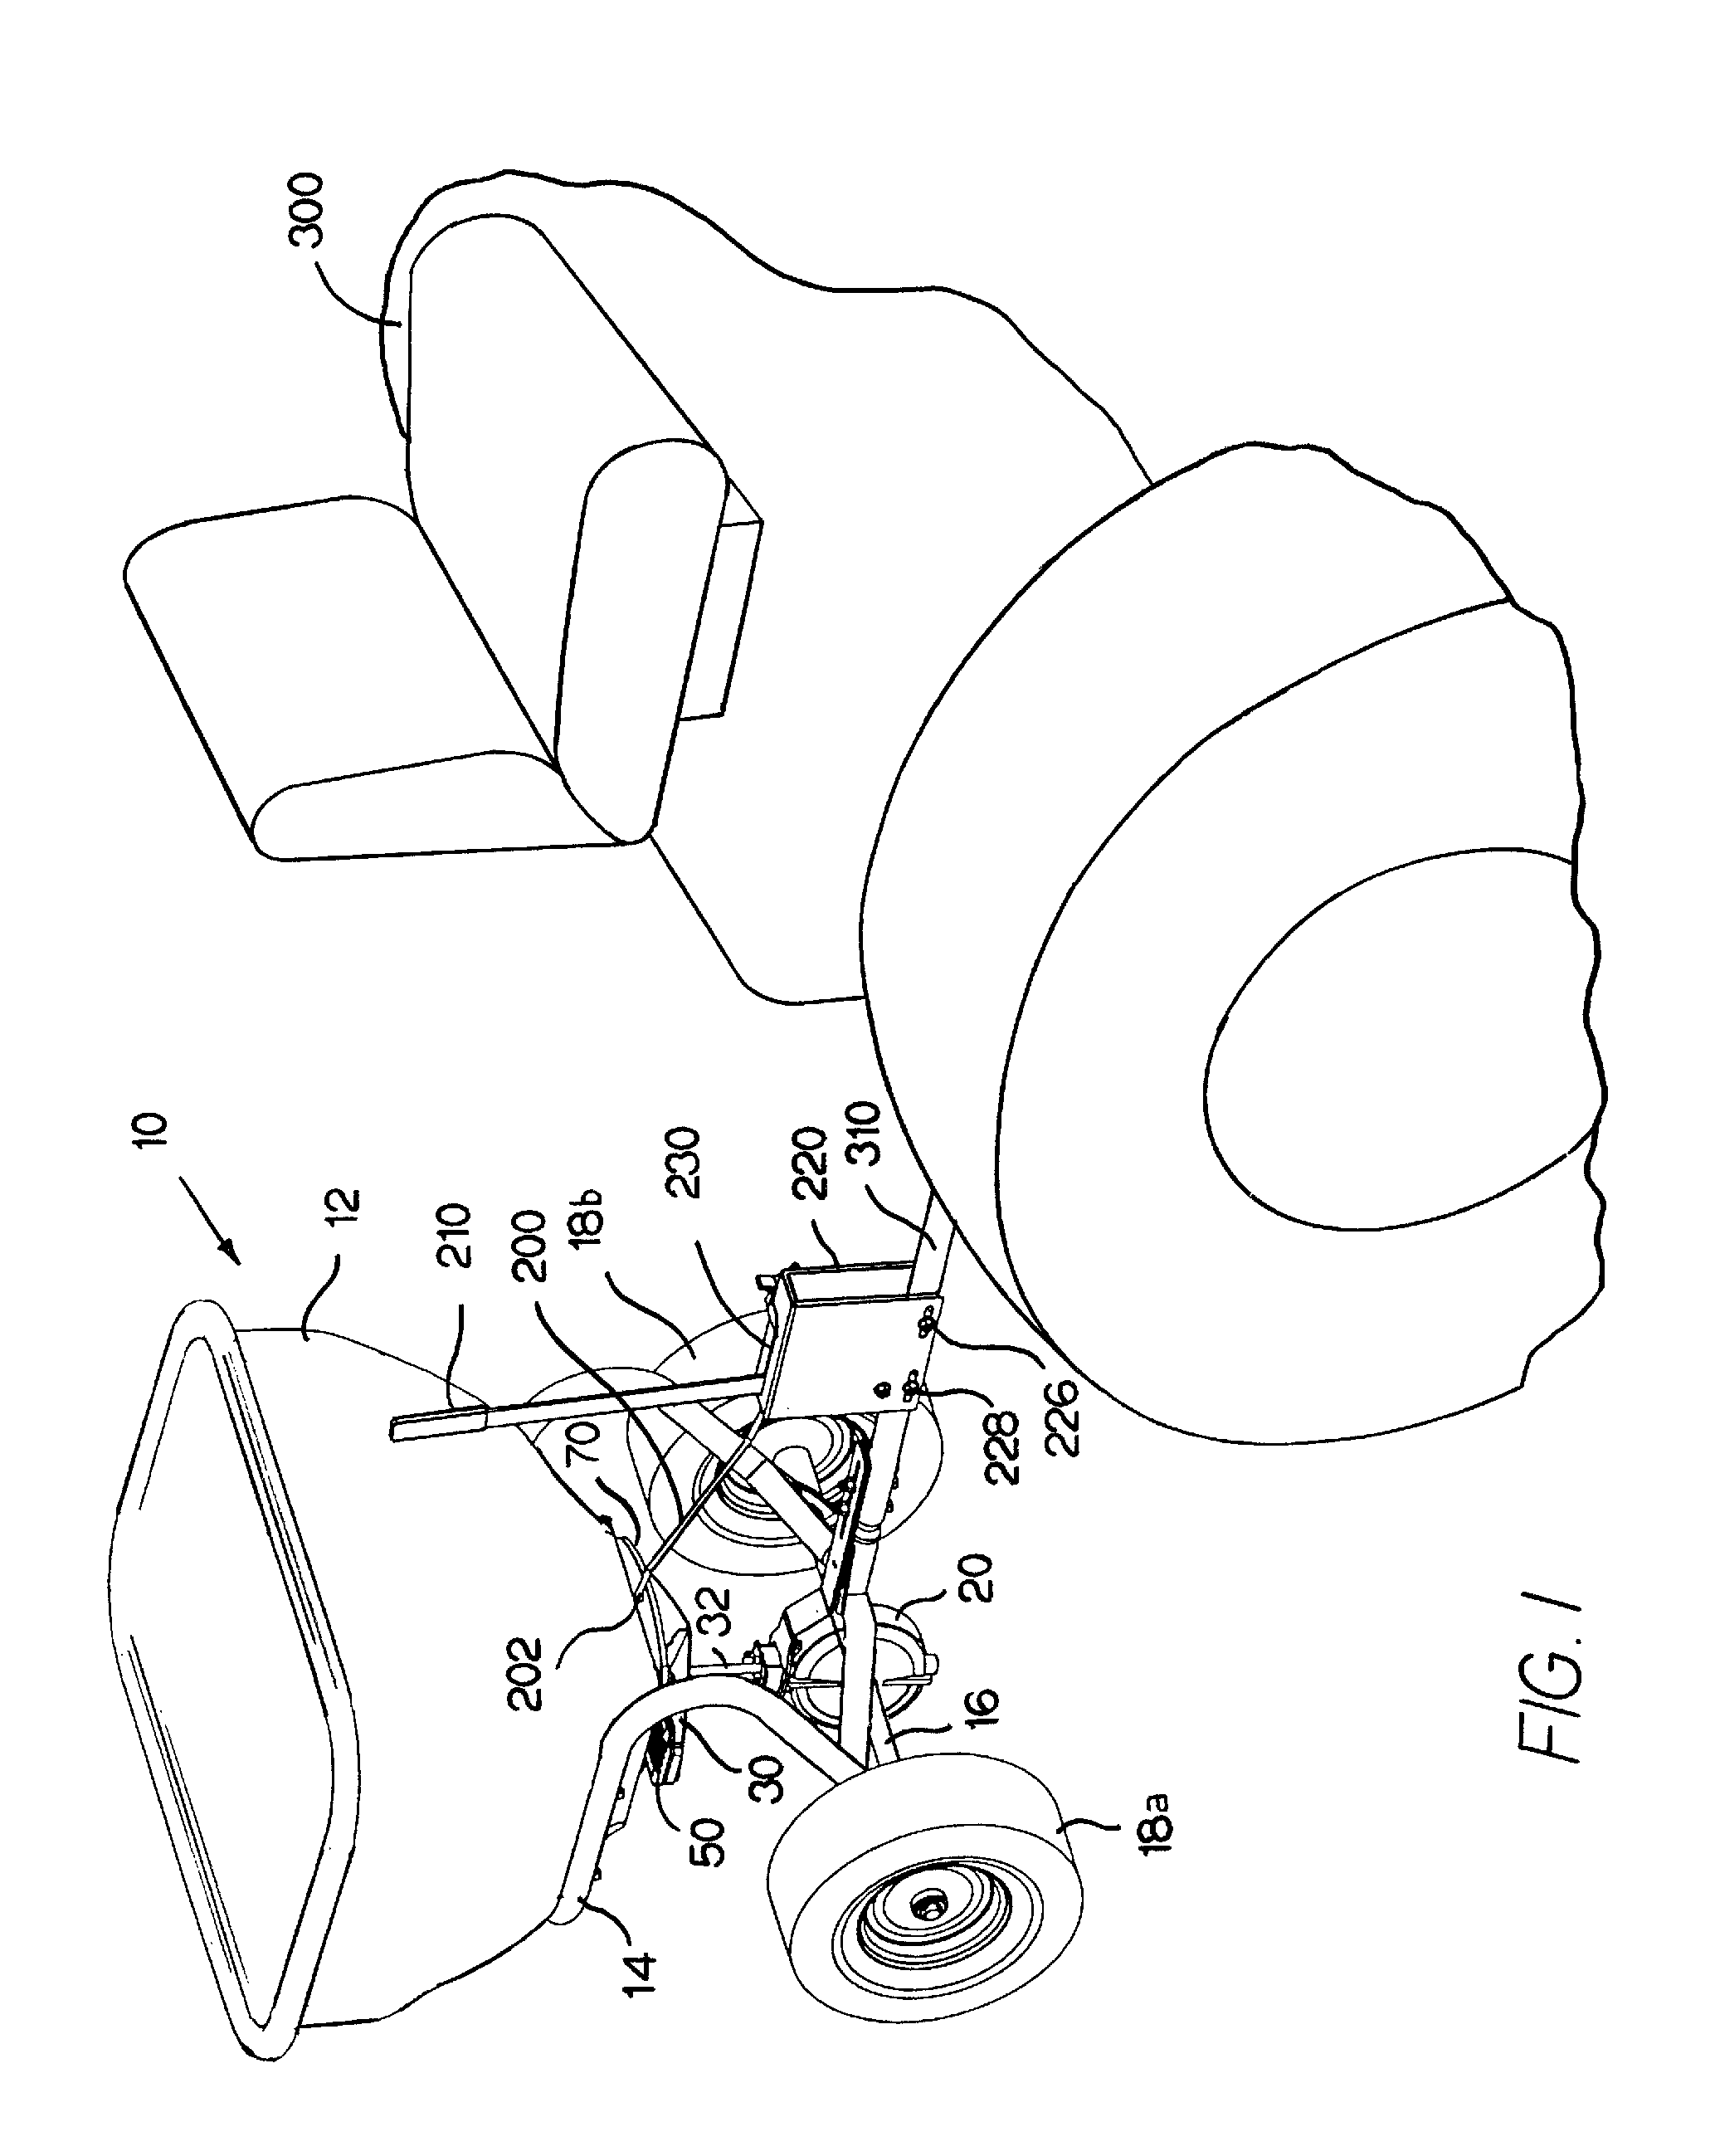 Broadcast spreader with a directional control assembly